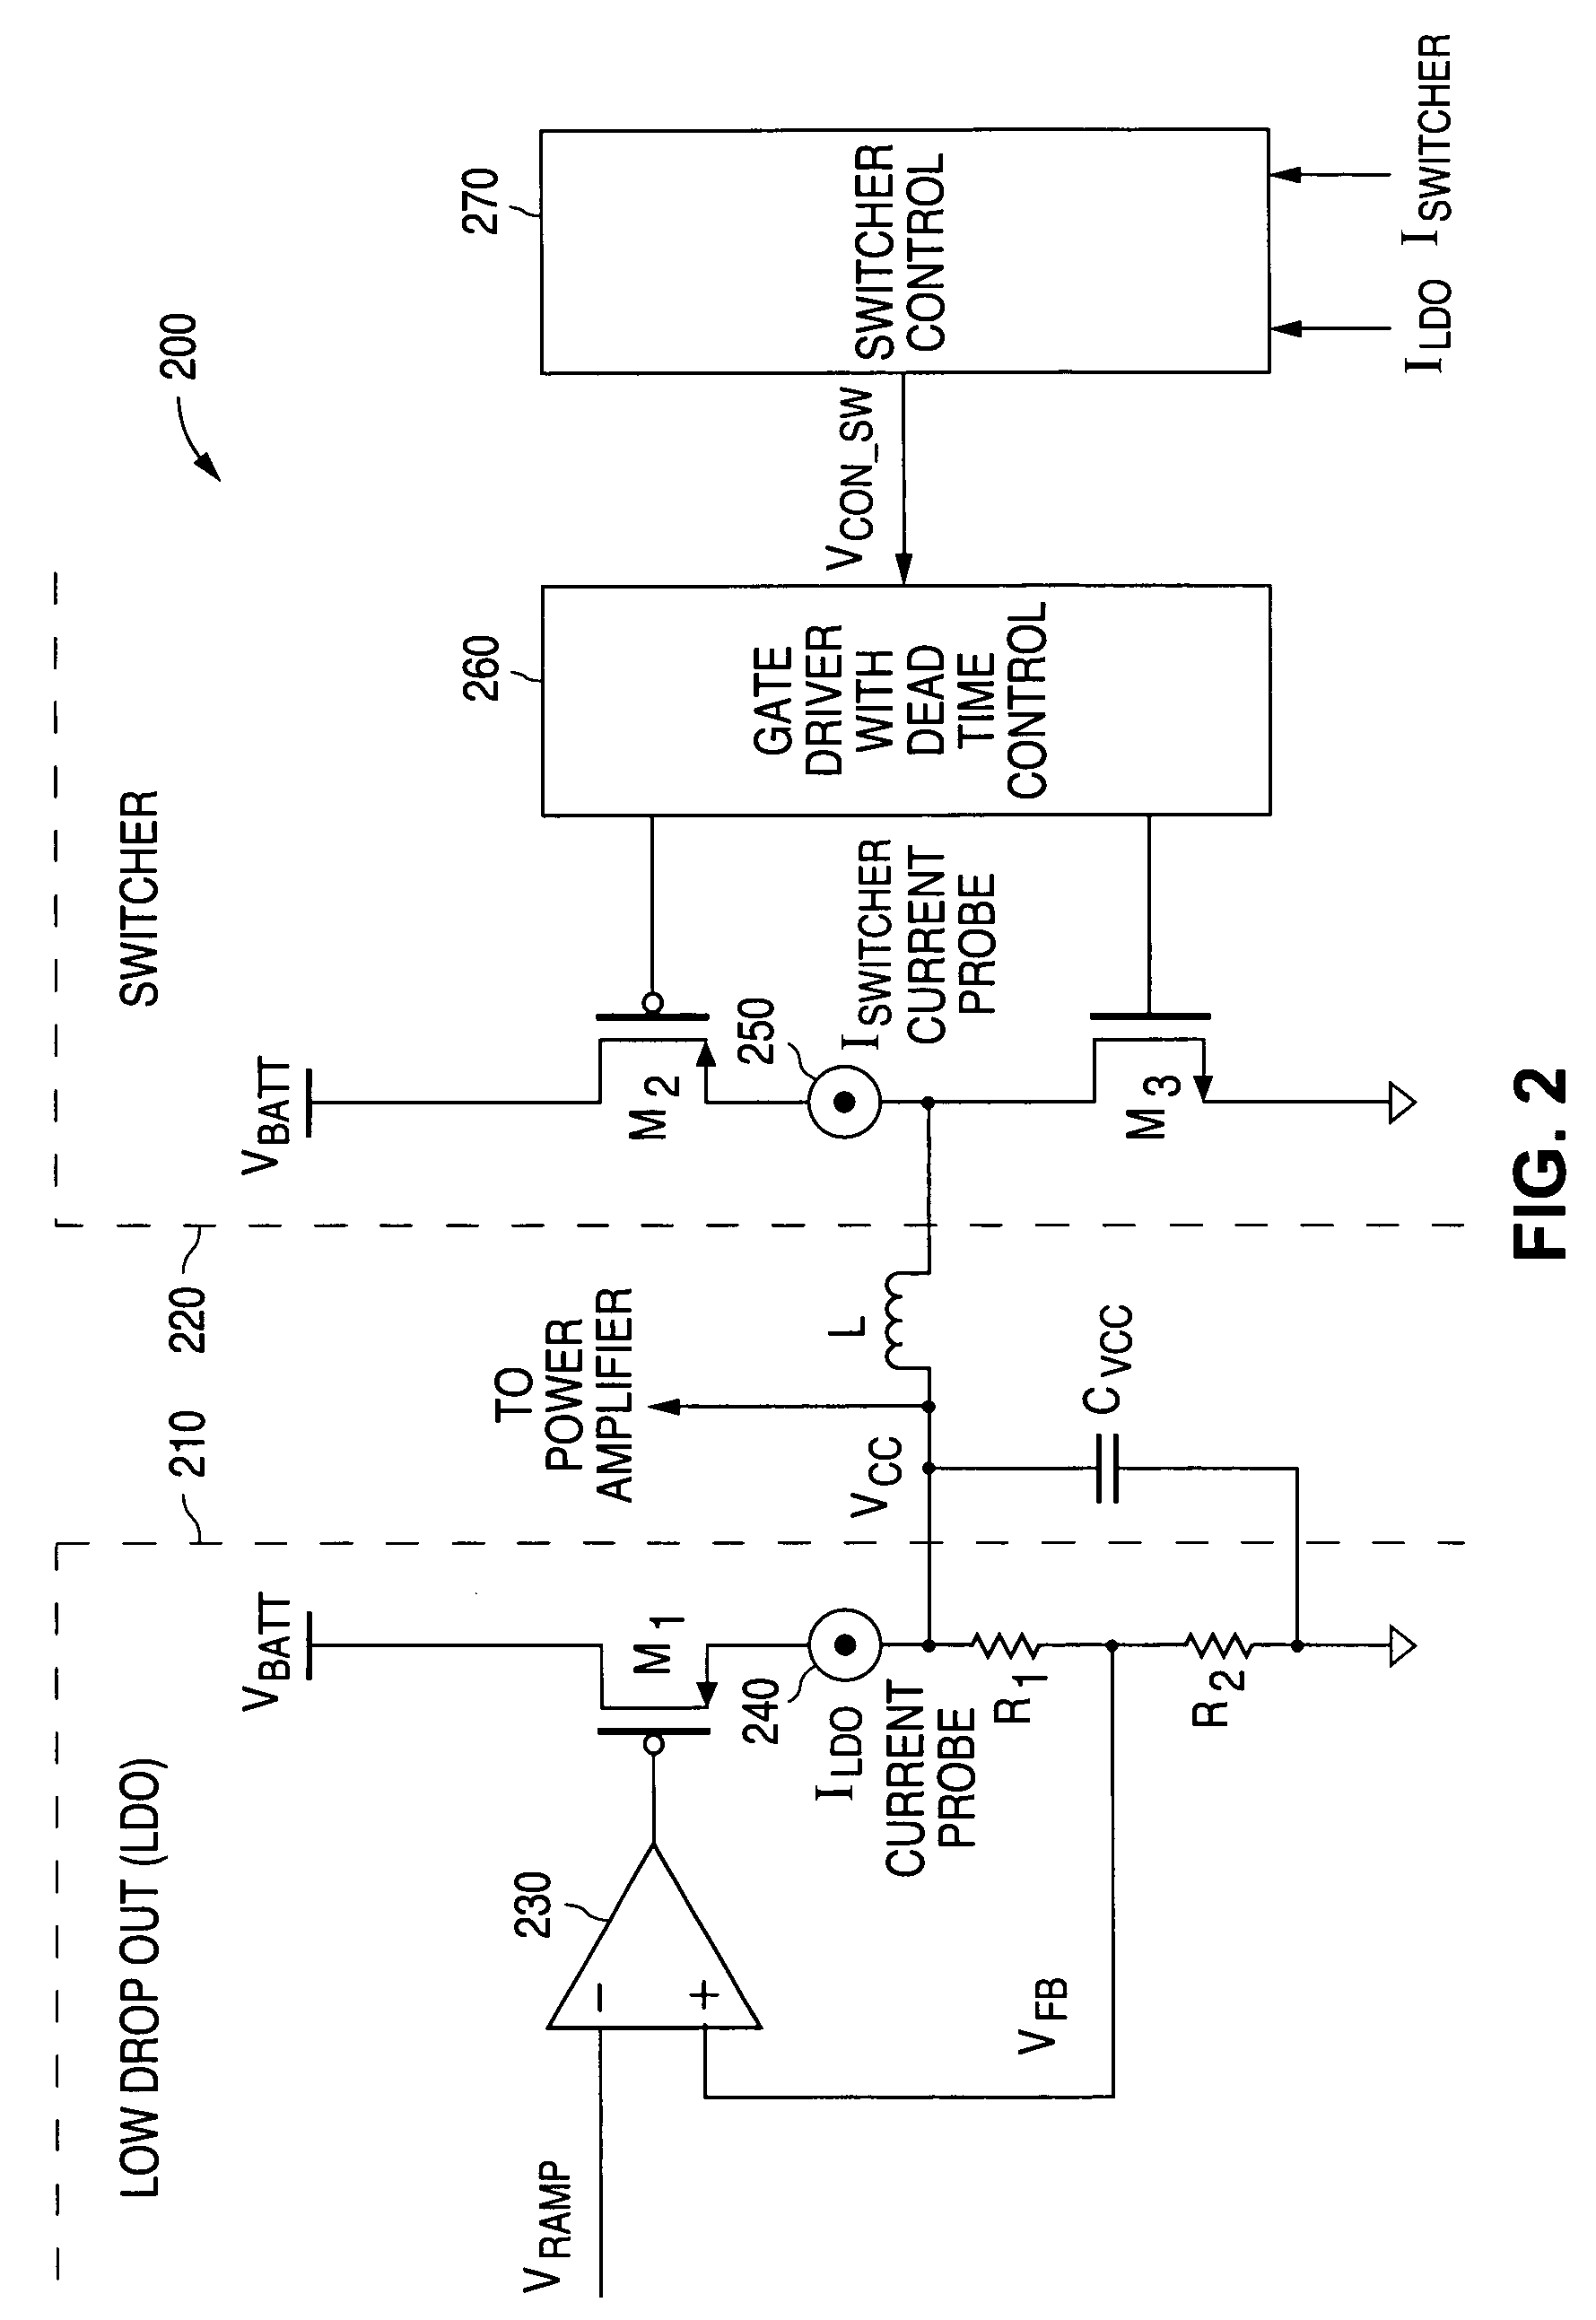 System and method for providing a highly efficient wide bandwidth power supply for a power amplifier